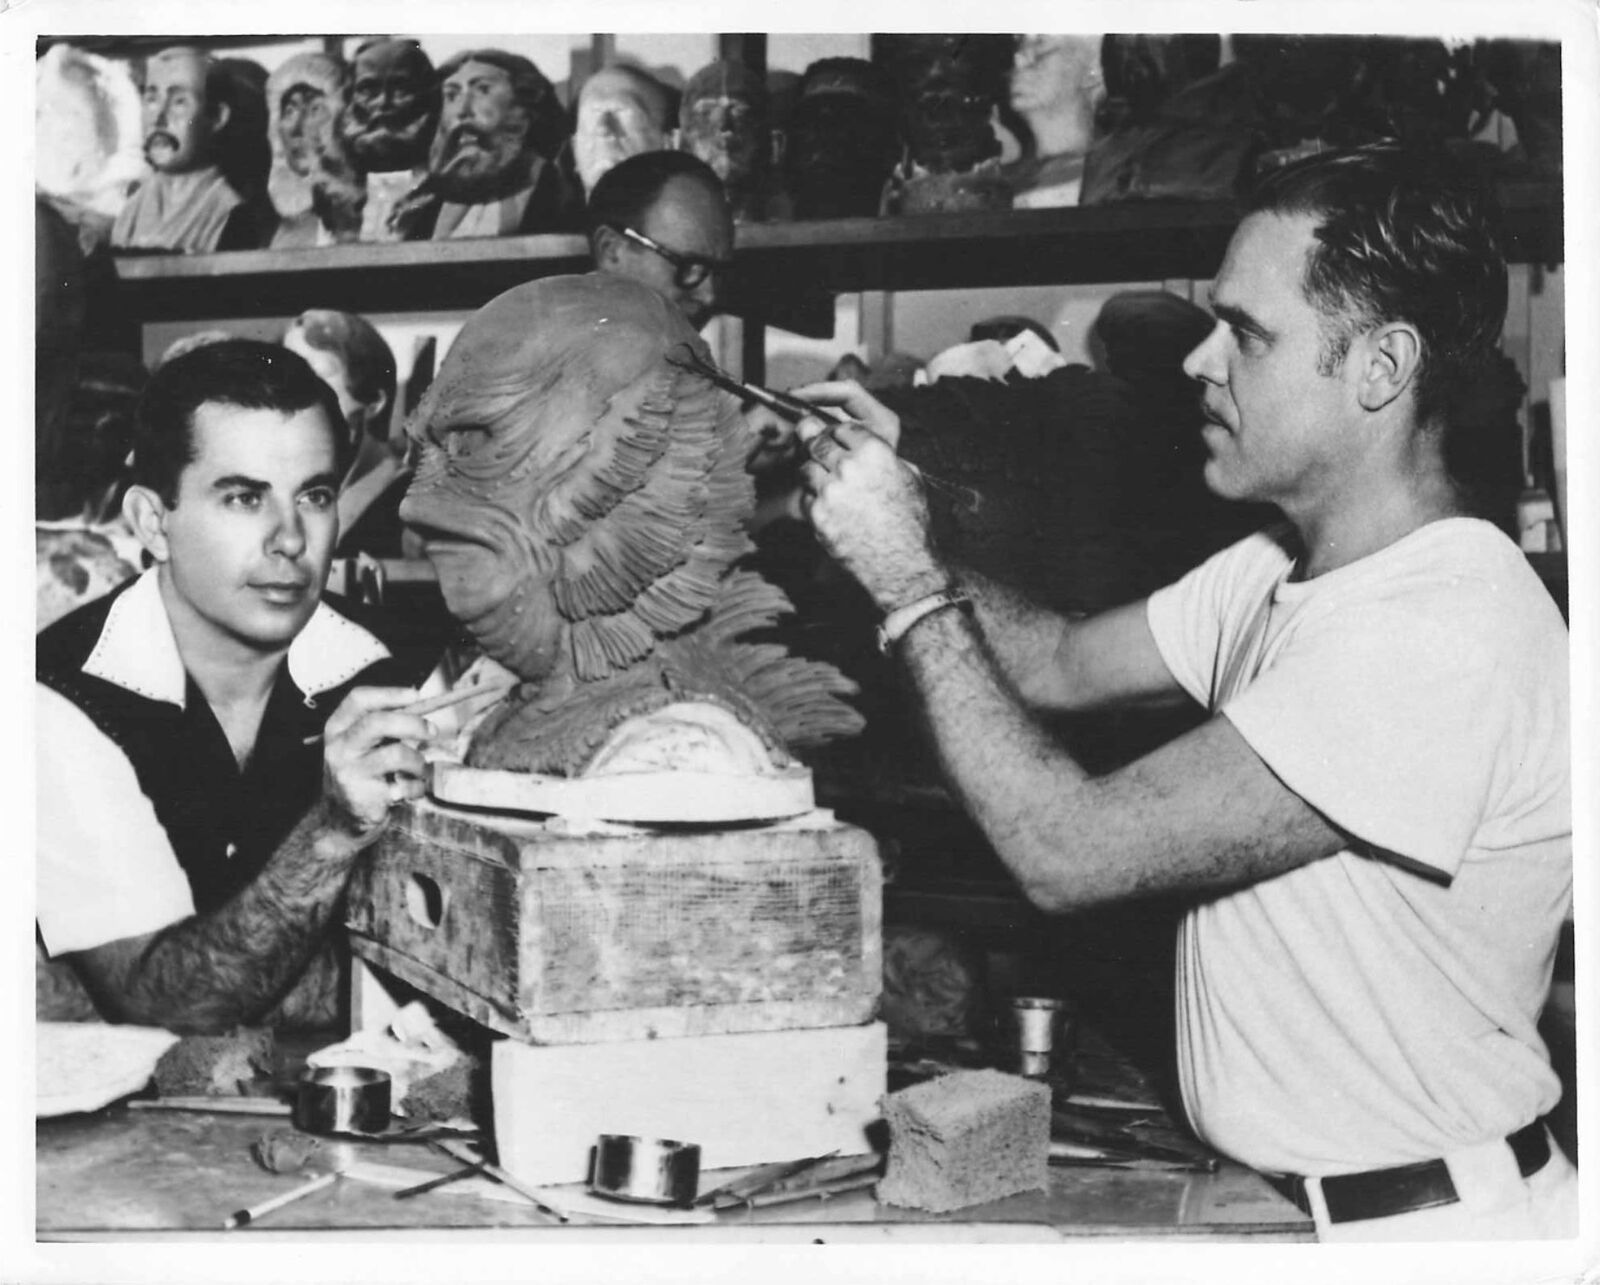 Bud Westmore Chris Mueller Creature from the Black Lagoon Jerry Neely Photo Rare